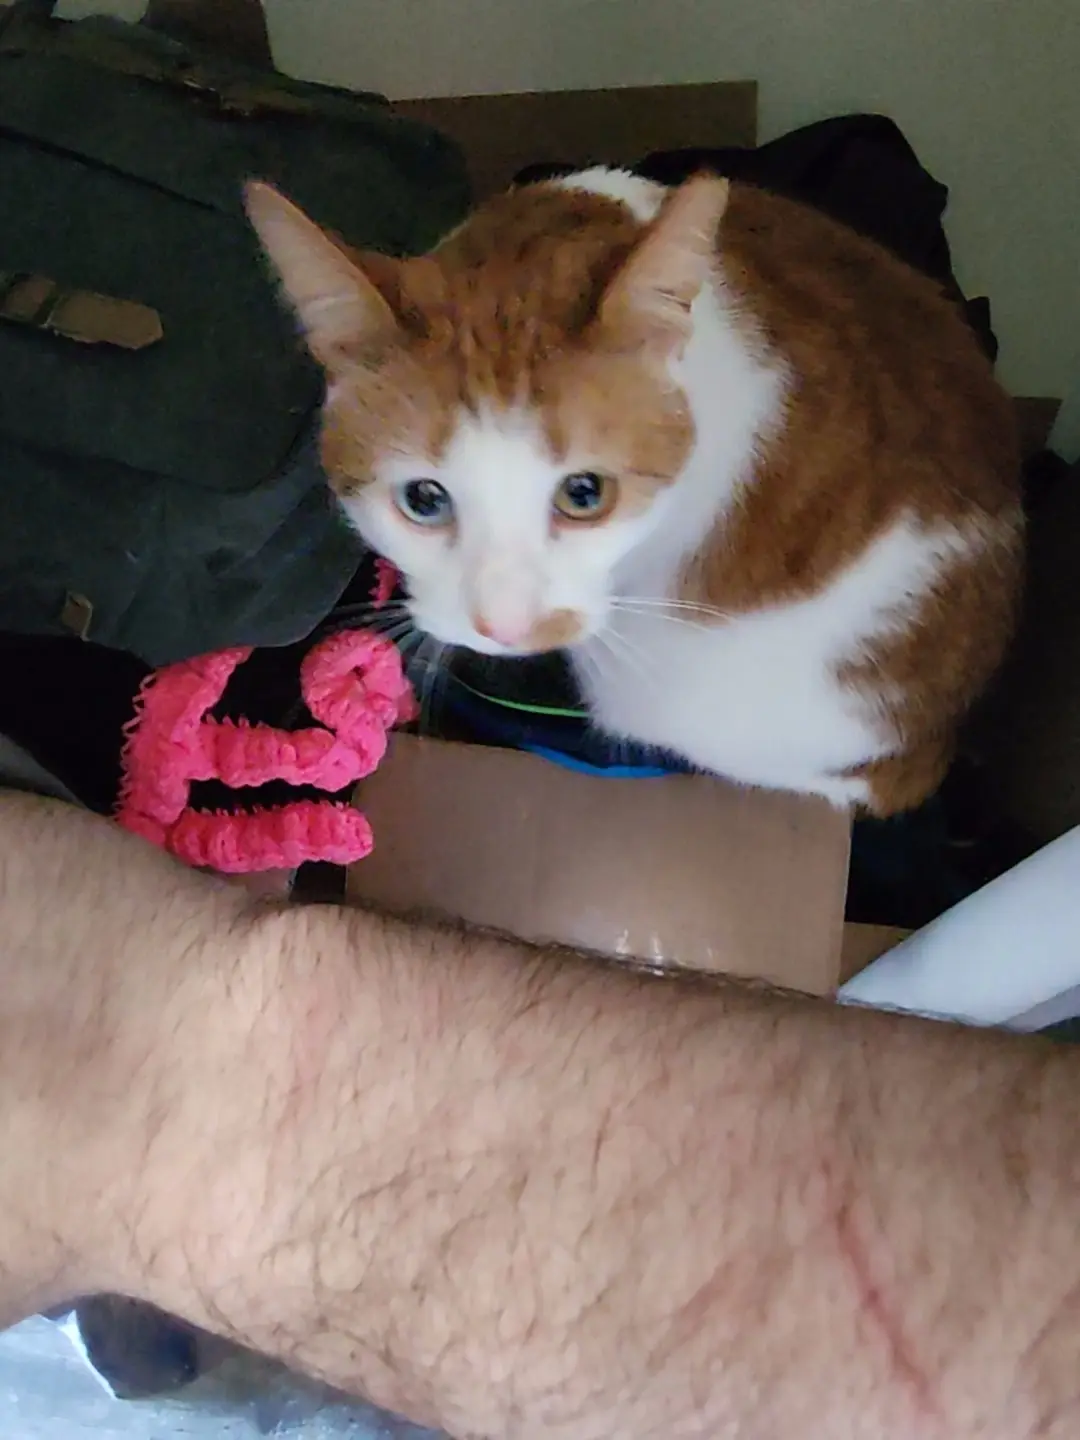 A picture of a white and orange cat with blue and orange eyes behind a hairy arm with several cat scratches